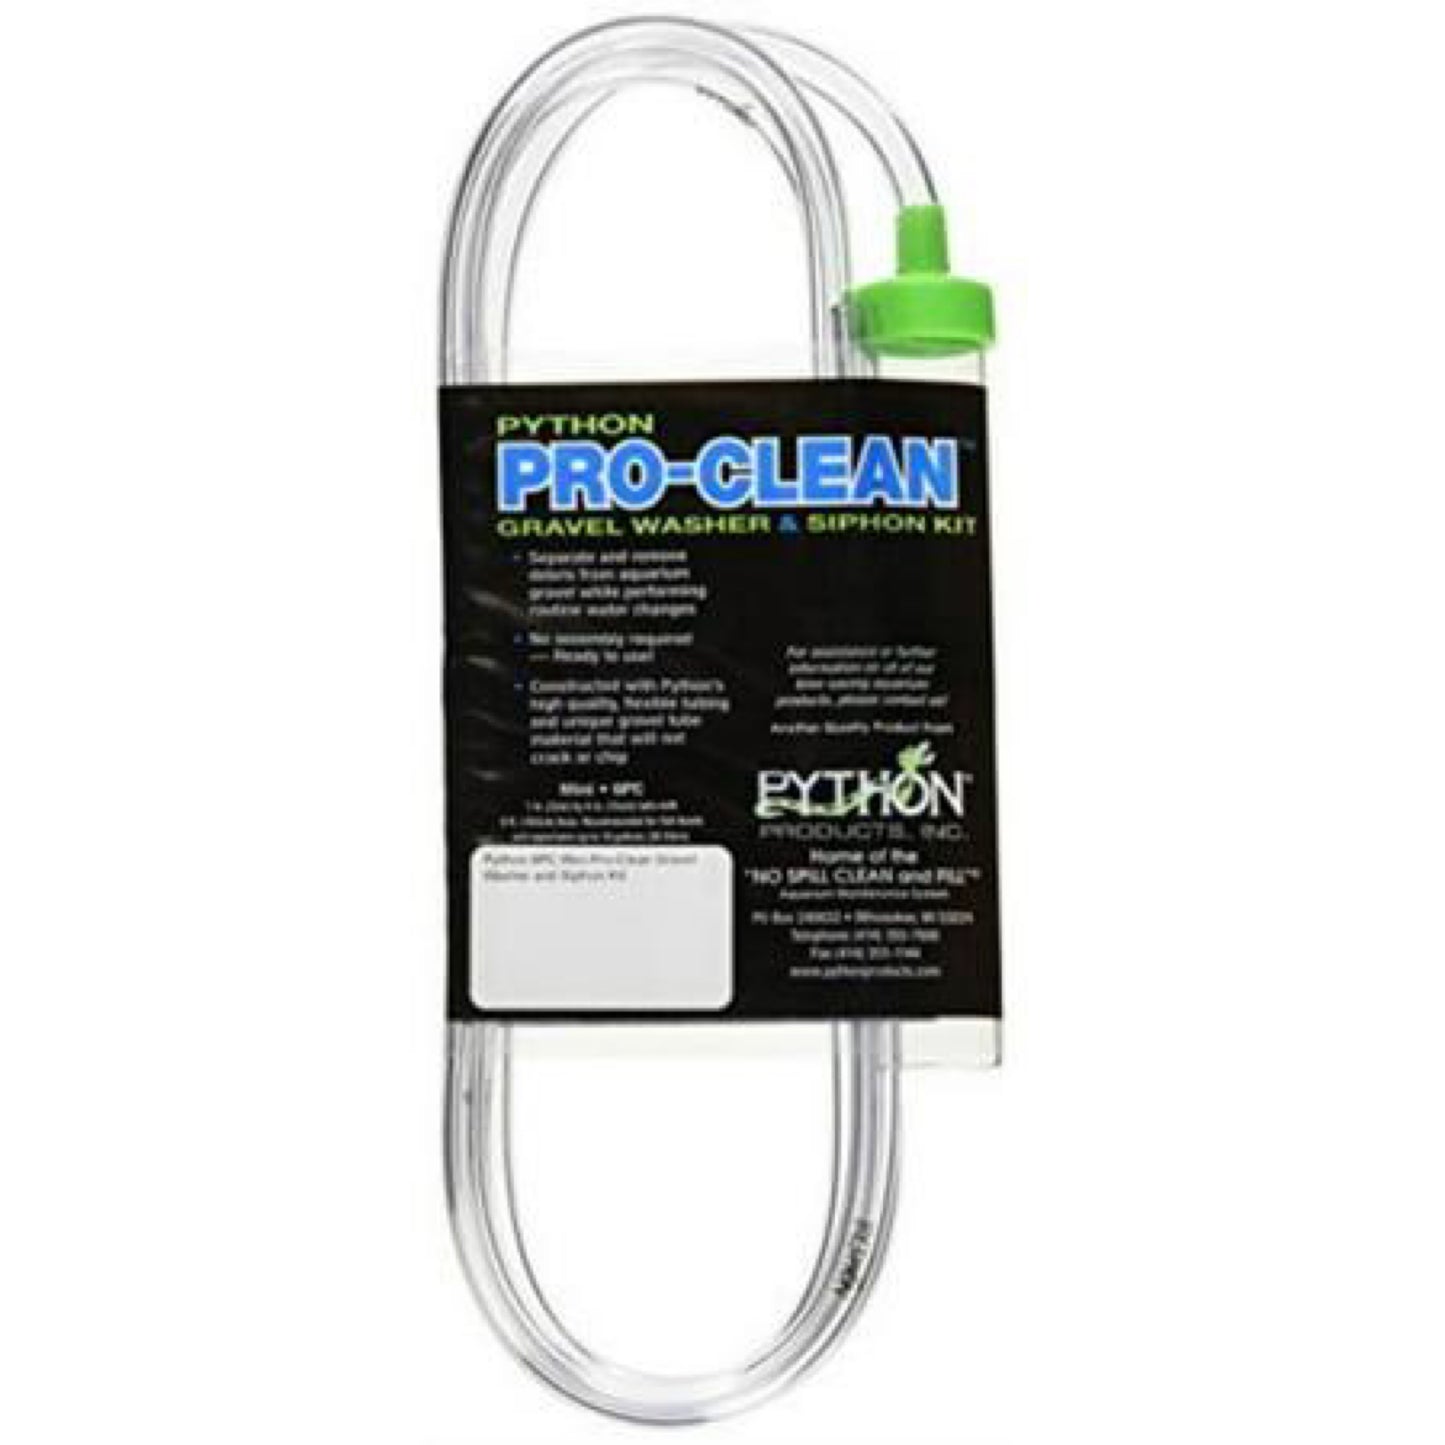 Python Pro Clean Aquarium Gravel Washer and Siphon Kit Mini 1 6 with 6. Hose